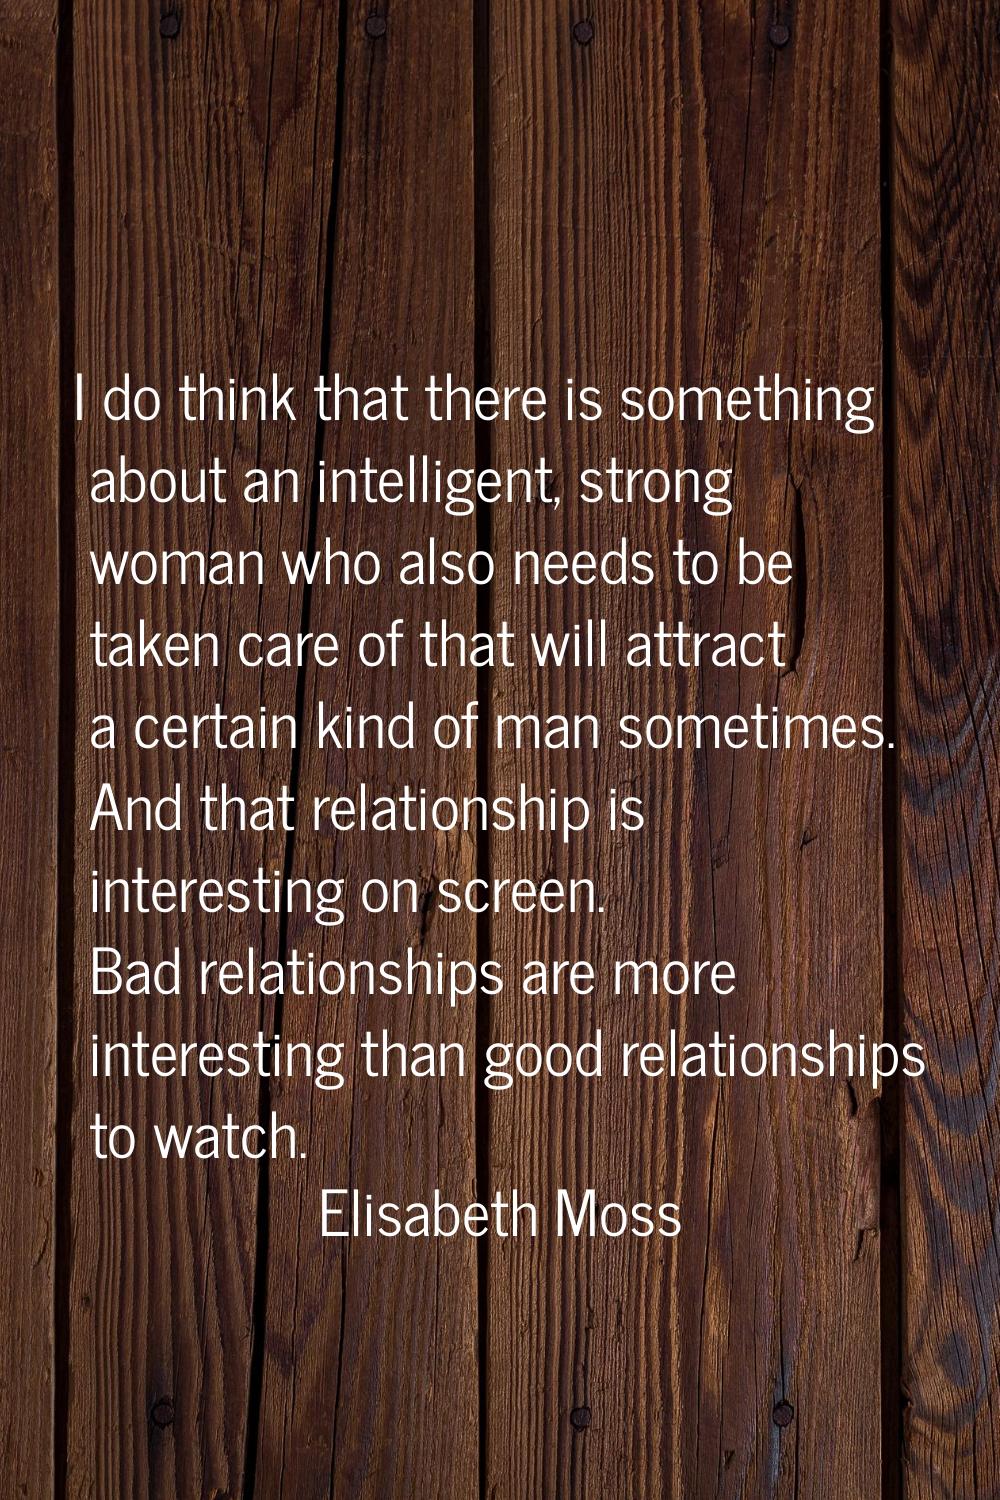 I do think that there is something about an intelligent, strong woman who also needs to be taken ca